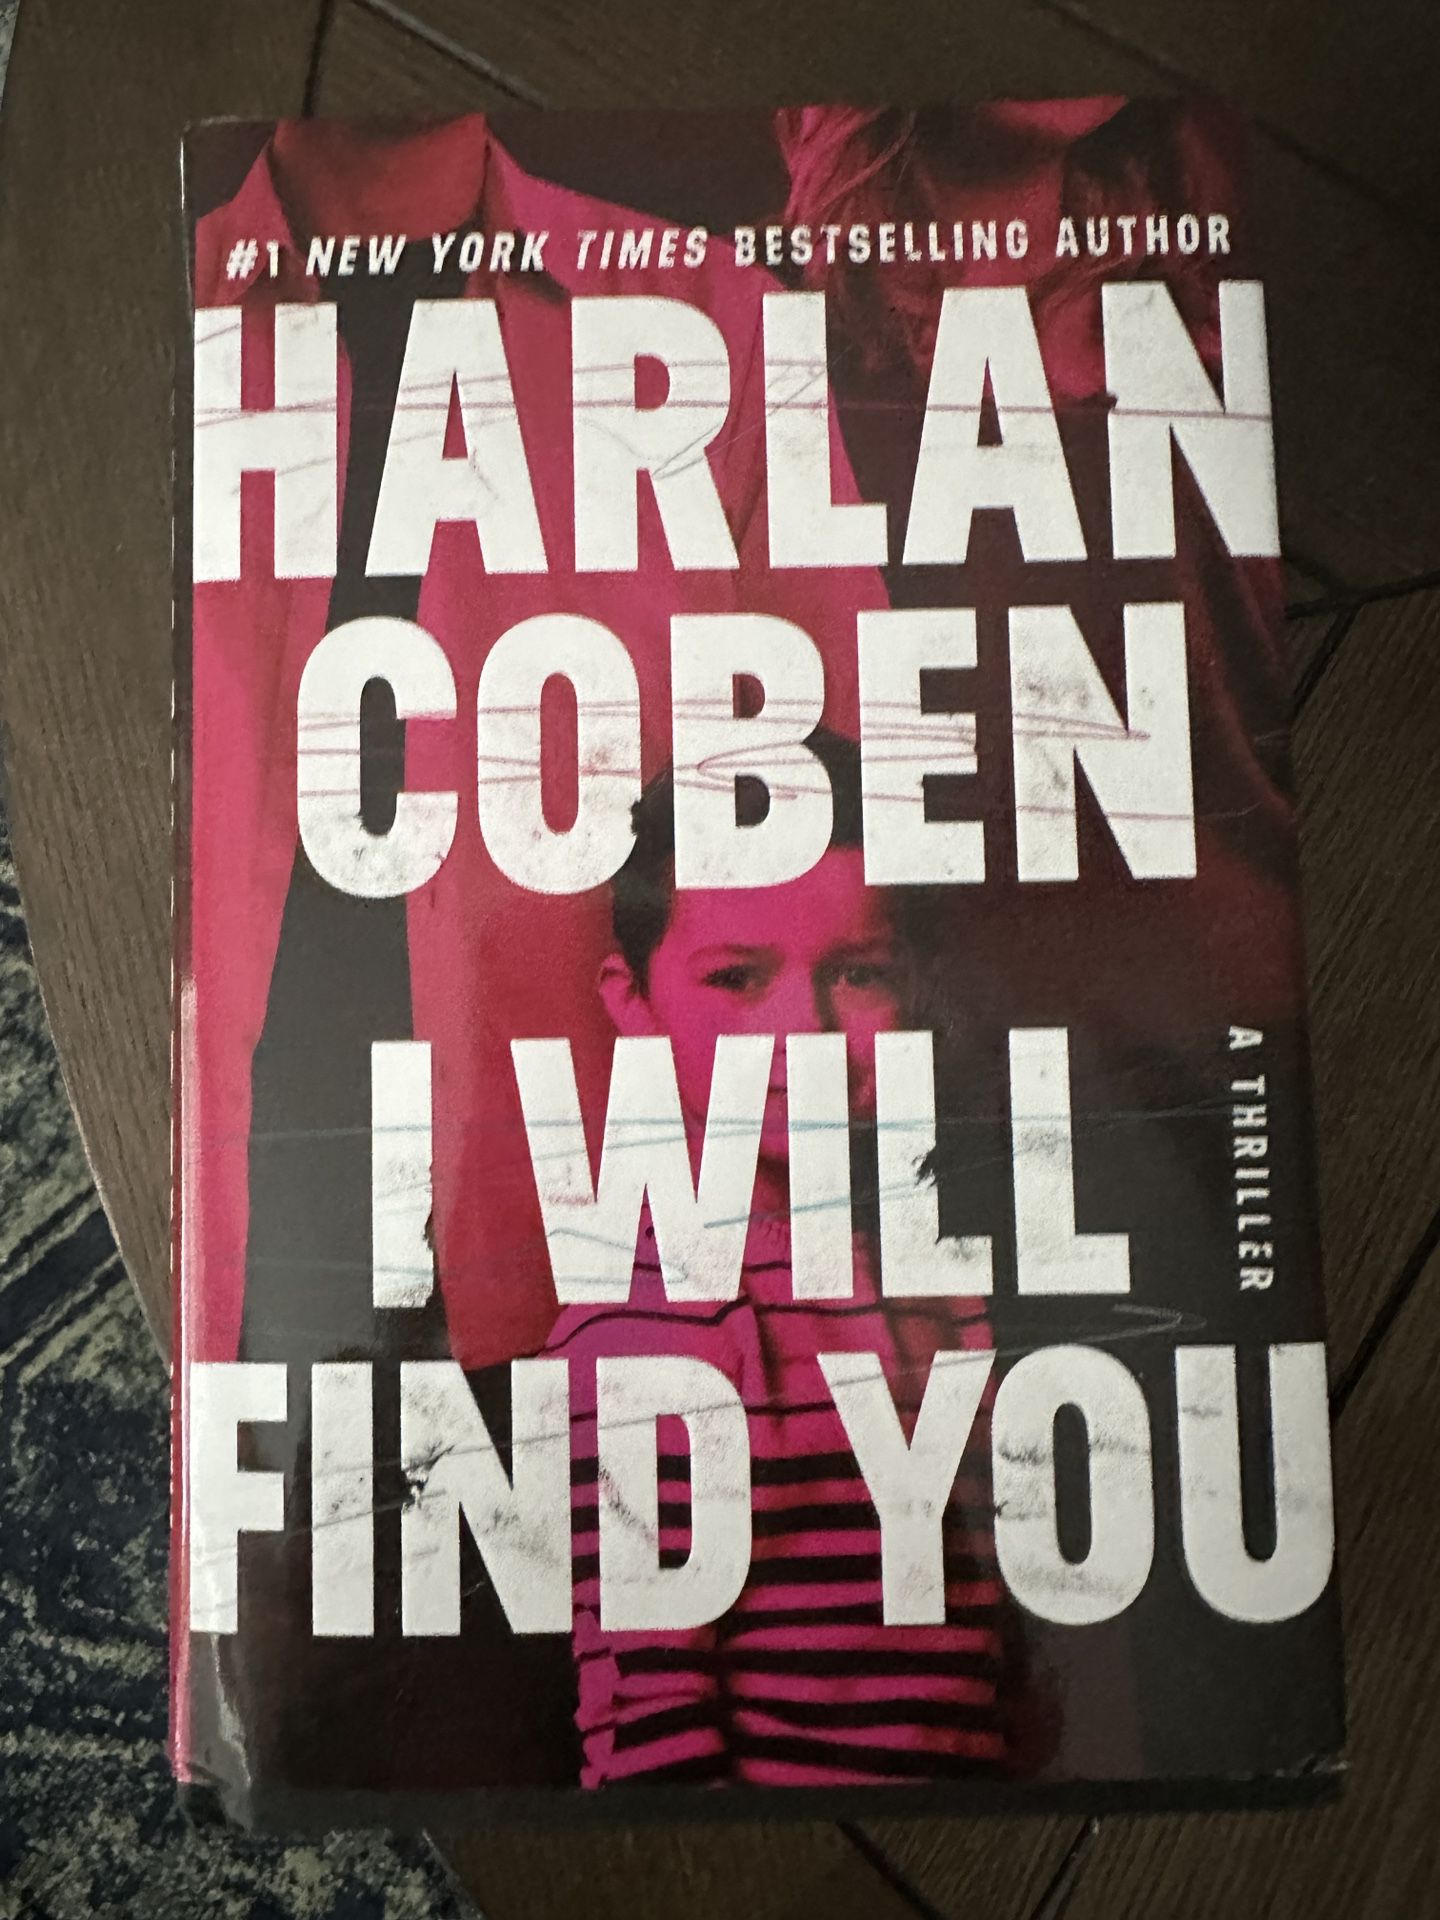 “I Will Find You” Harlan Coben - Hardcover Book